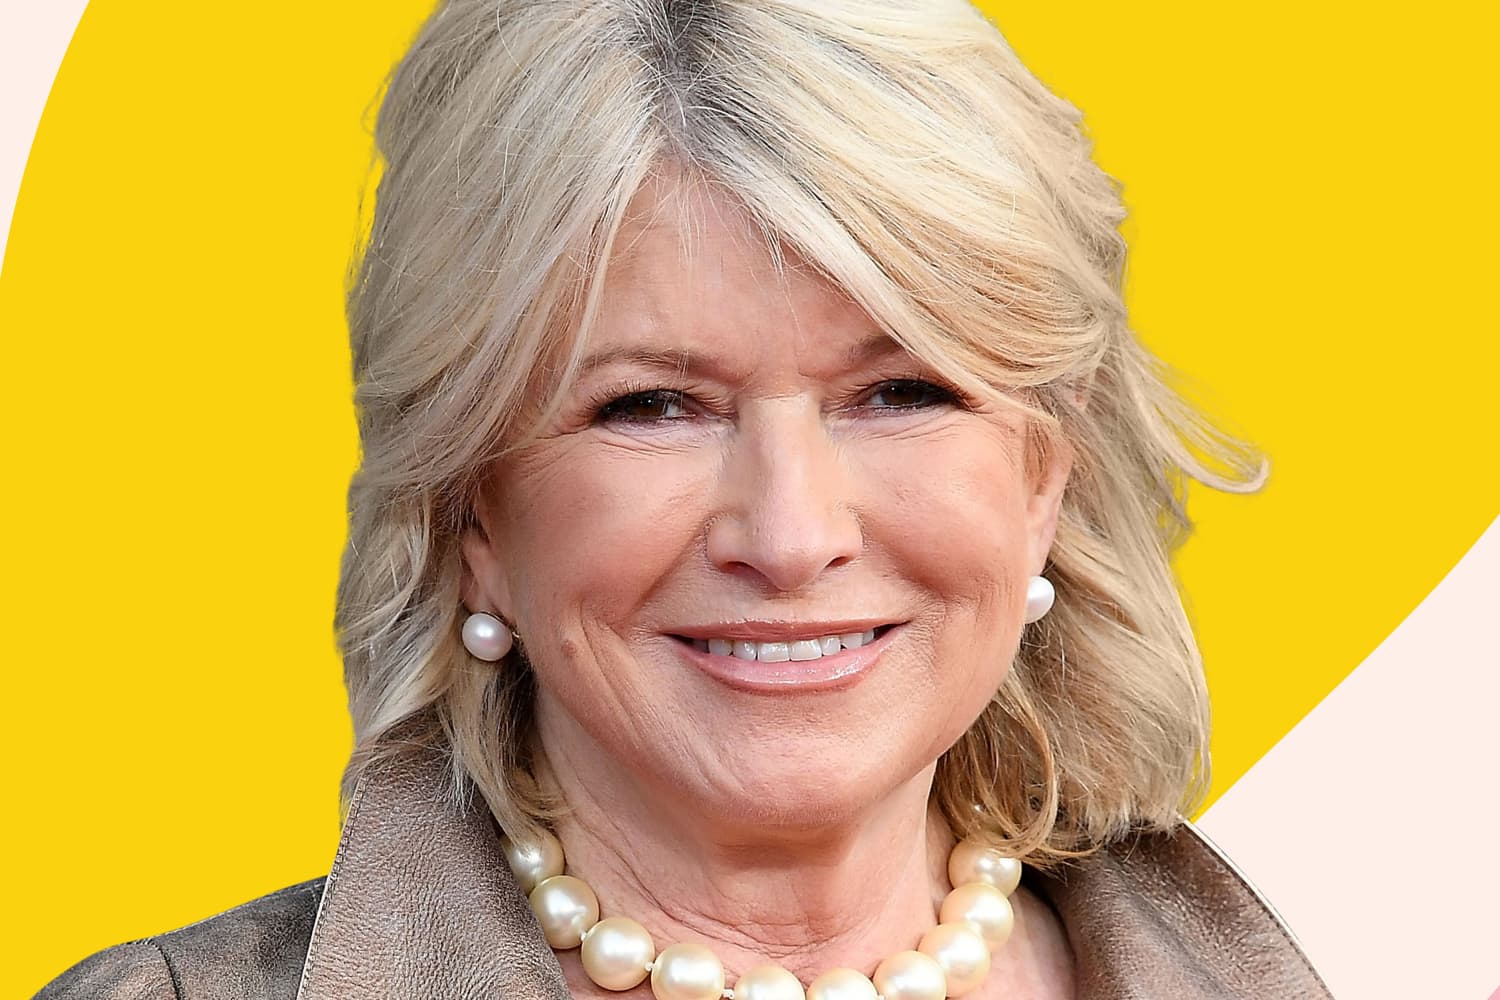 The 10 Martha Stewart Recipes We Can't Live Without